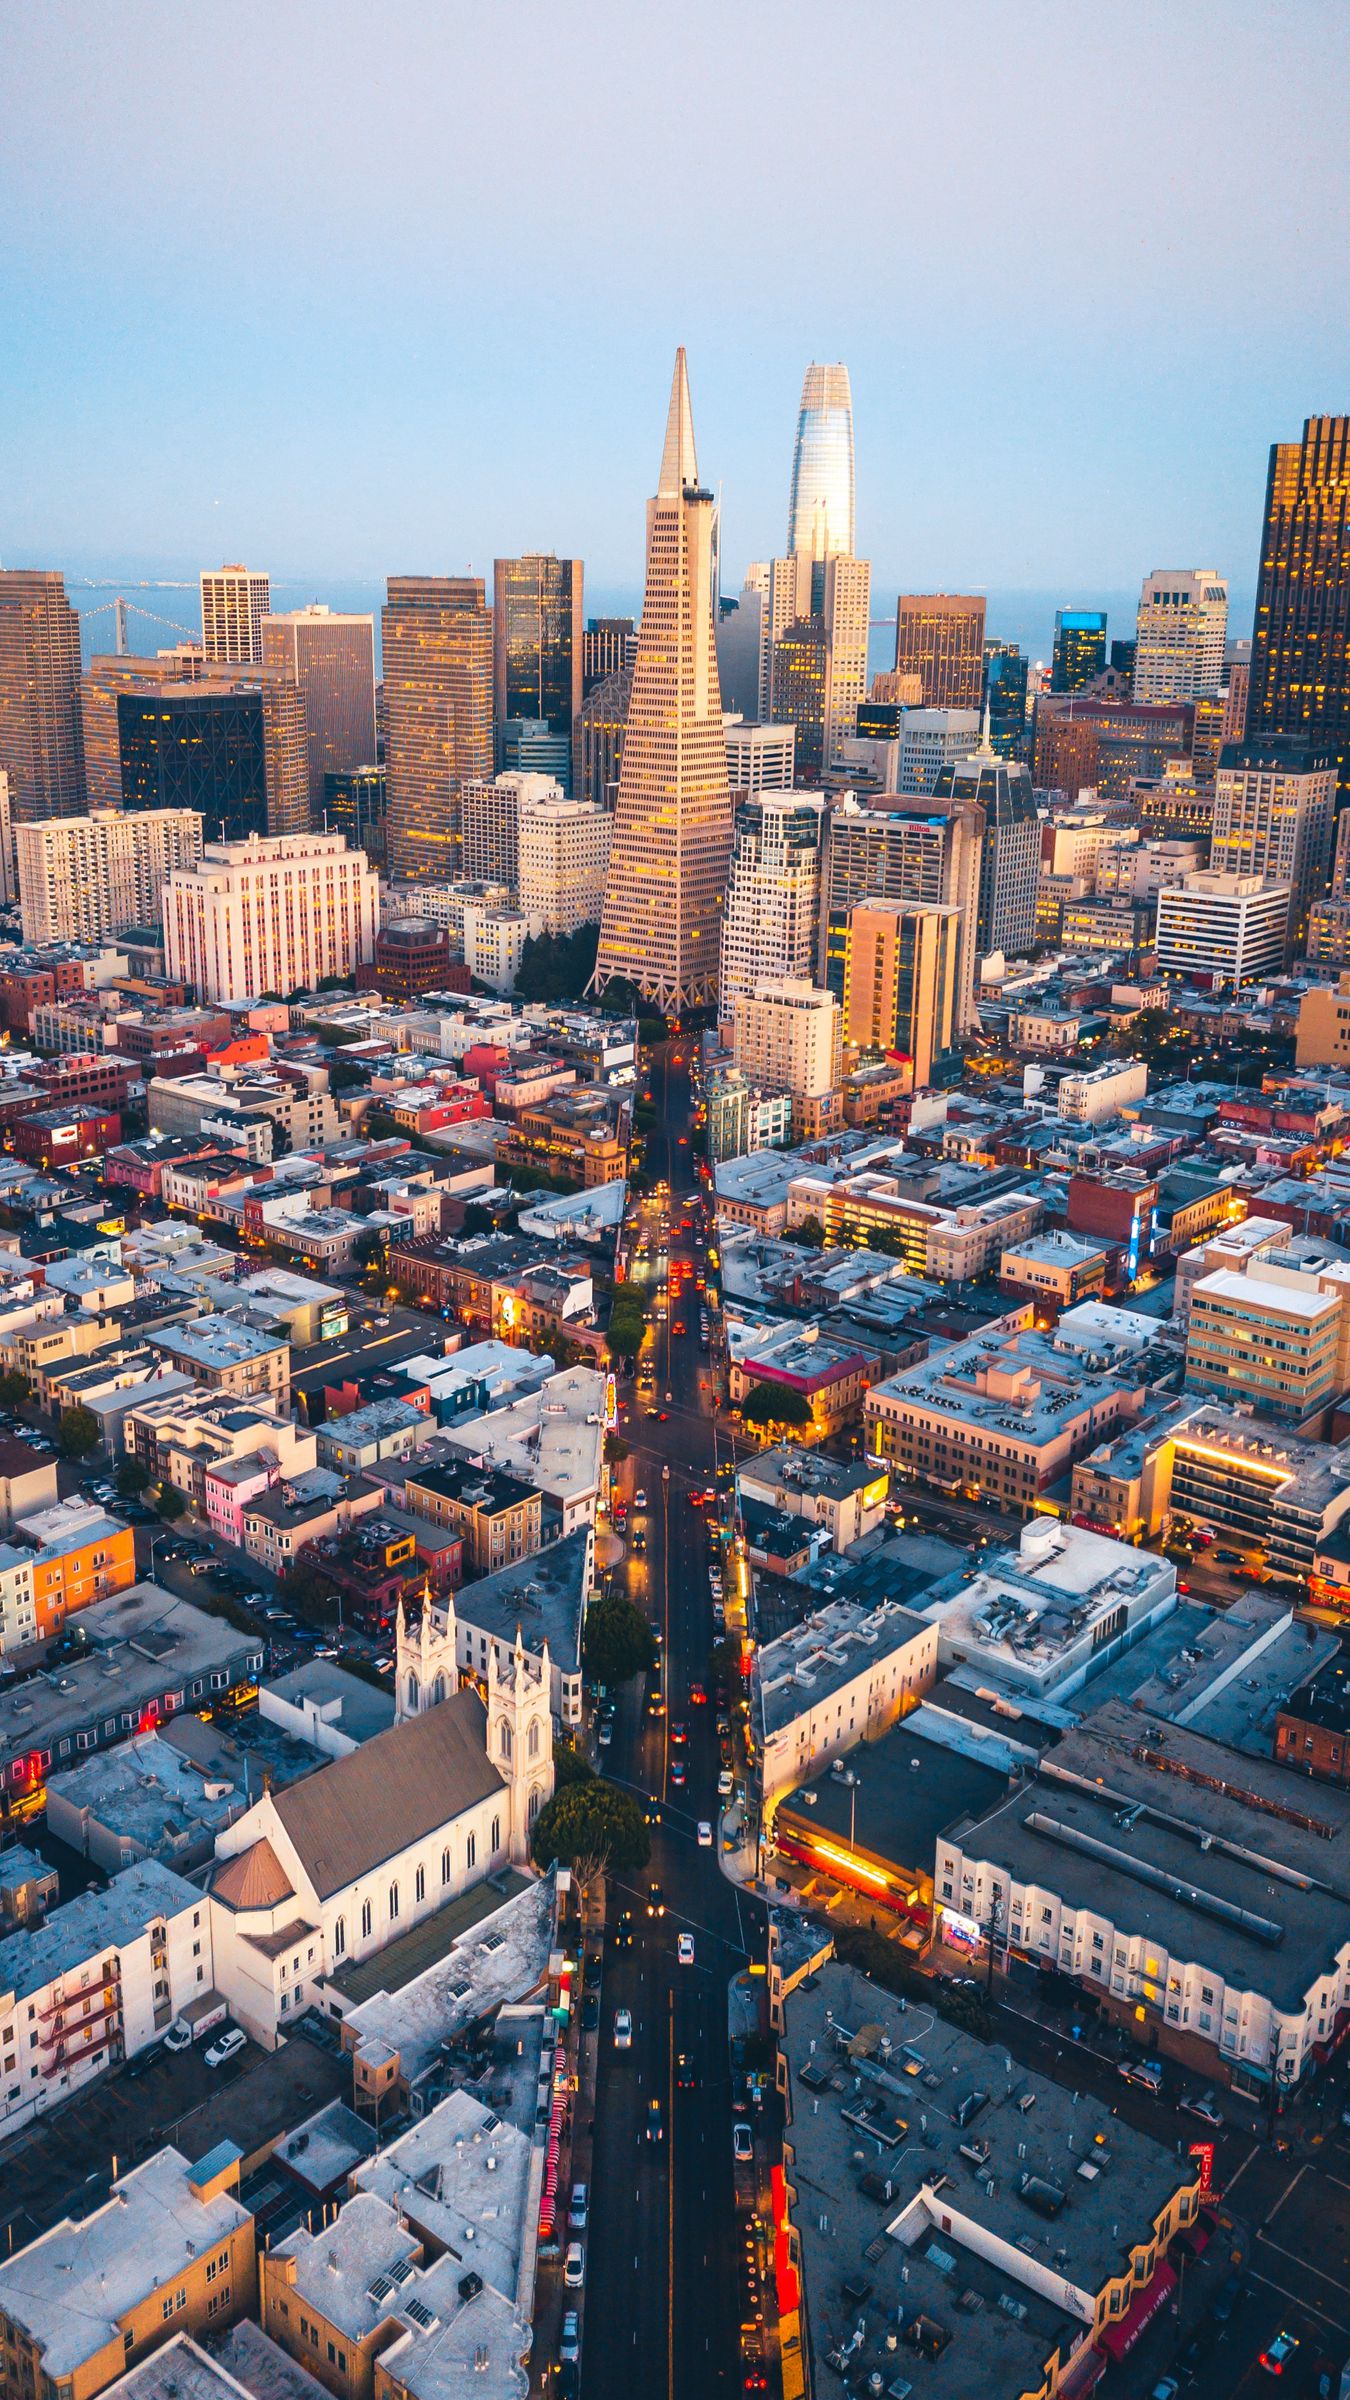 Download wallpaper 1350x2400 city, aerial view, metropolis, overview, san  francisco, usa iphone 8+/7+/6s+/6+ for parallax hd background